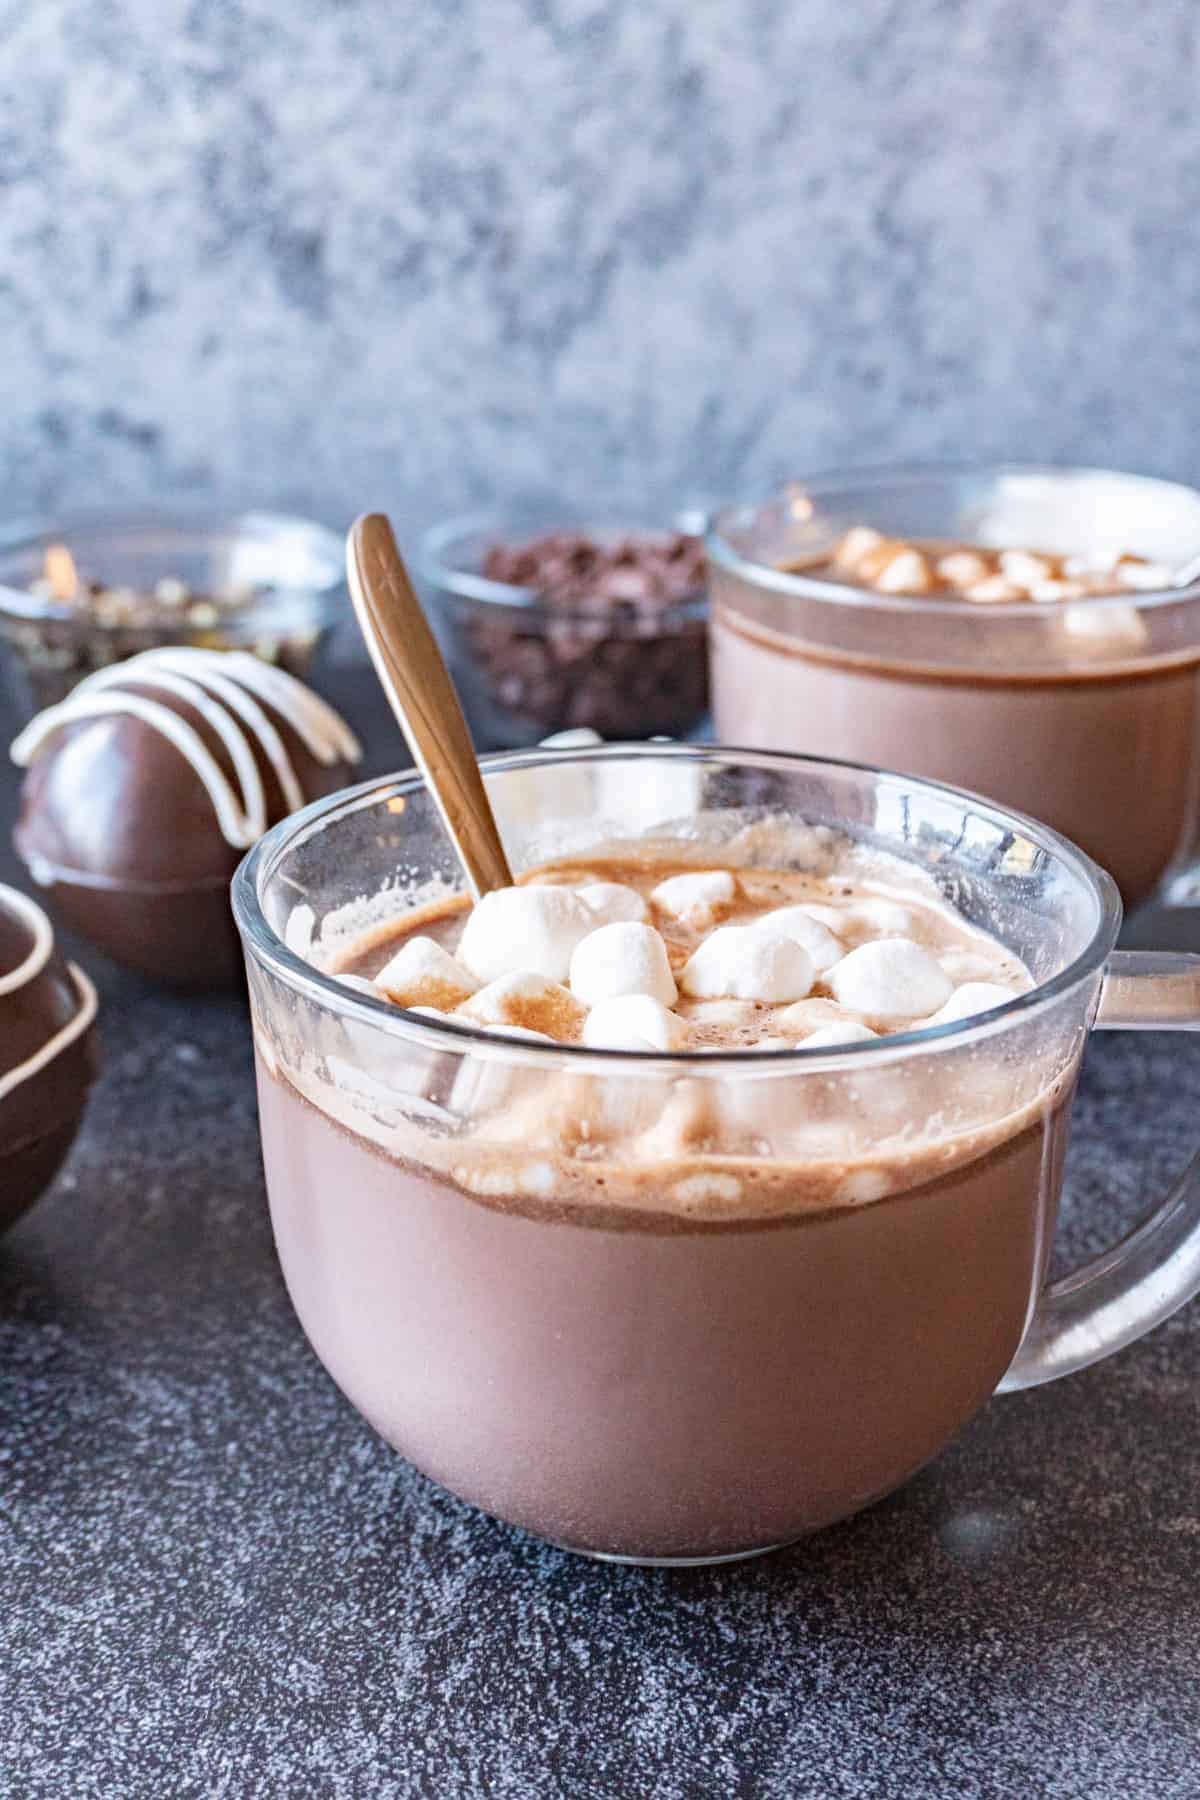 Hot Chocolate Bomb dissolved in cup